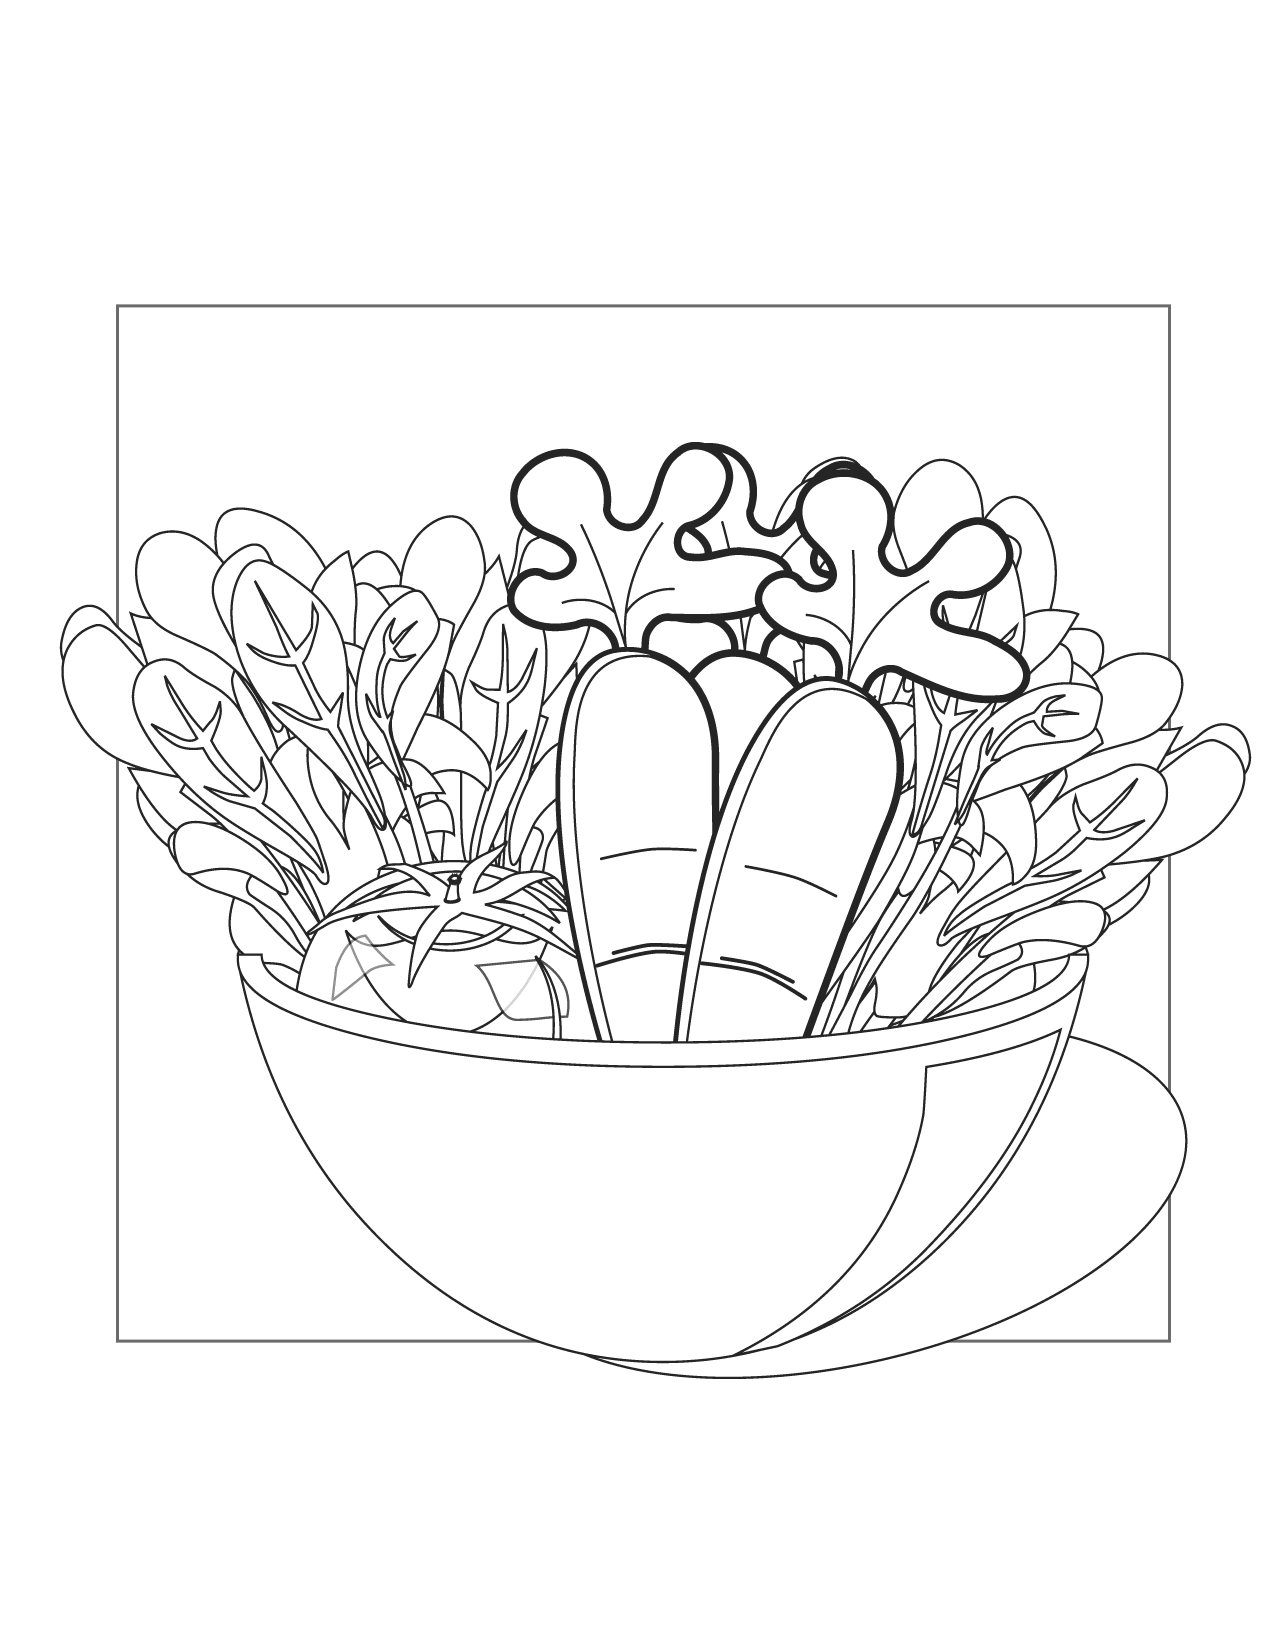 Bowl Of Vegetables Coloring Page